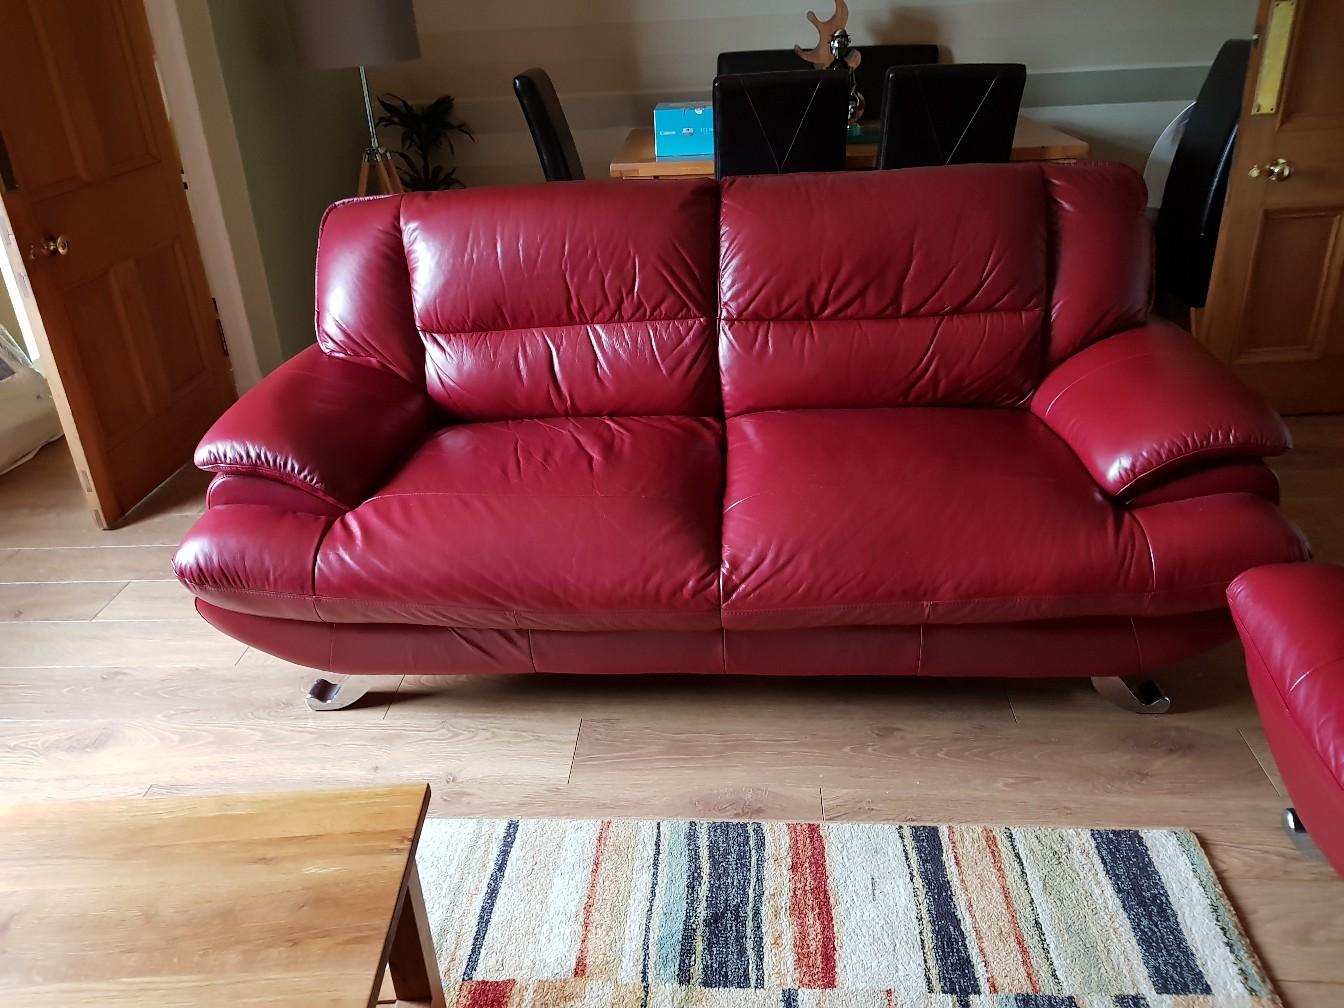 Two Leather Sofas For Sale In Ml1 Motherwell For 215 00 For Sale